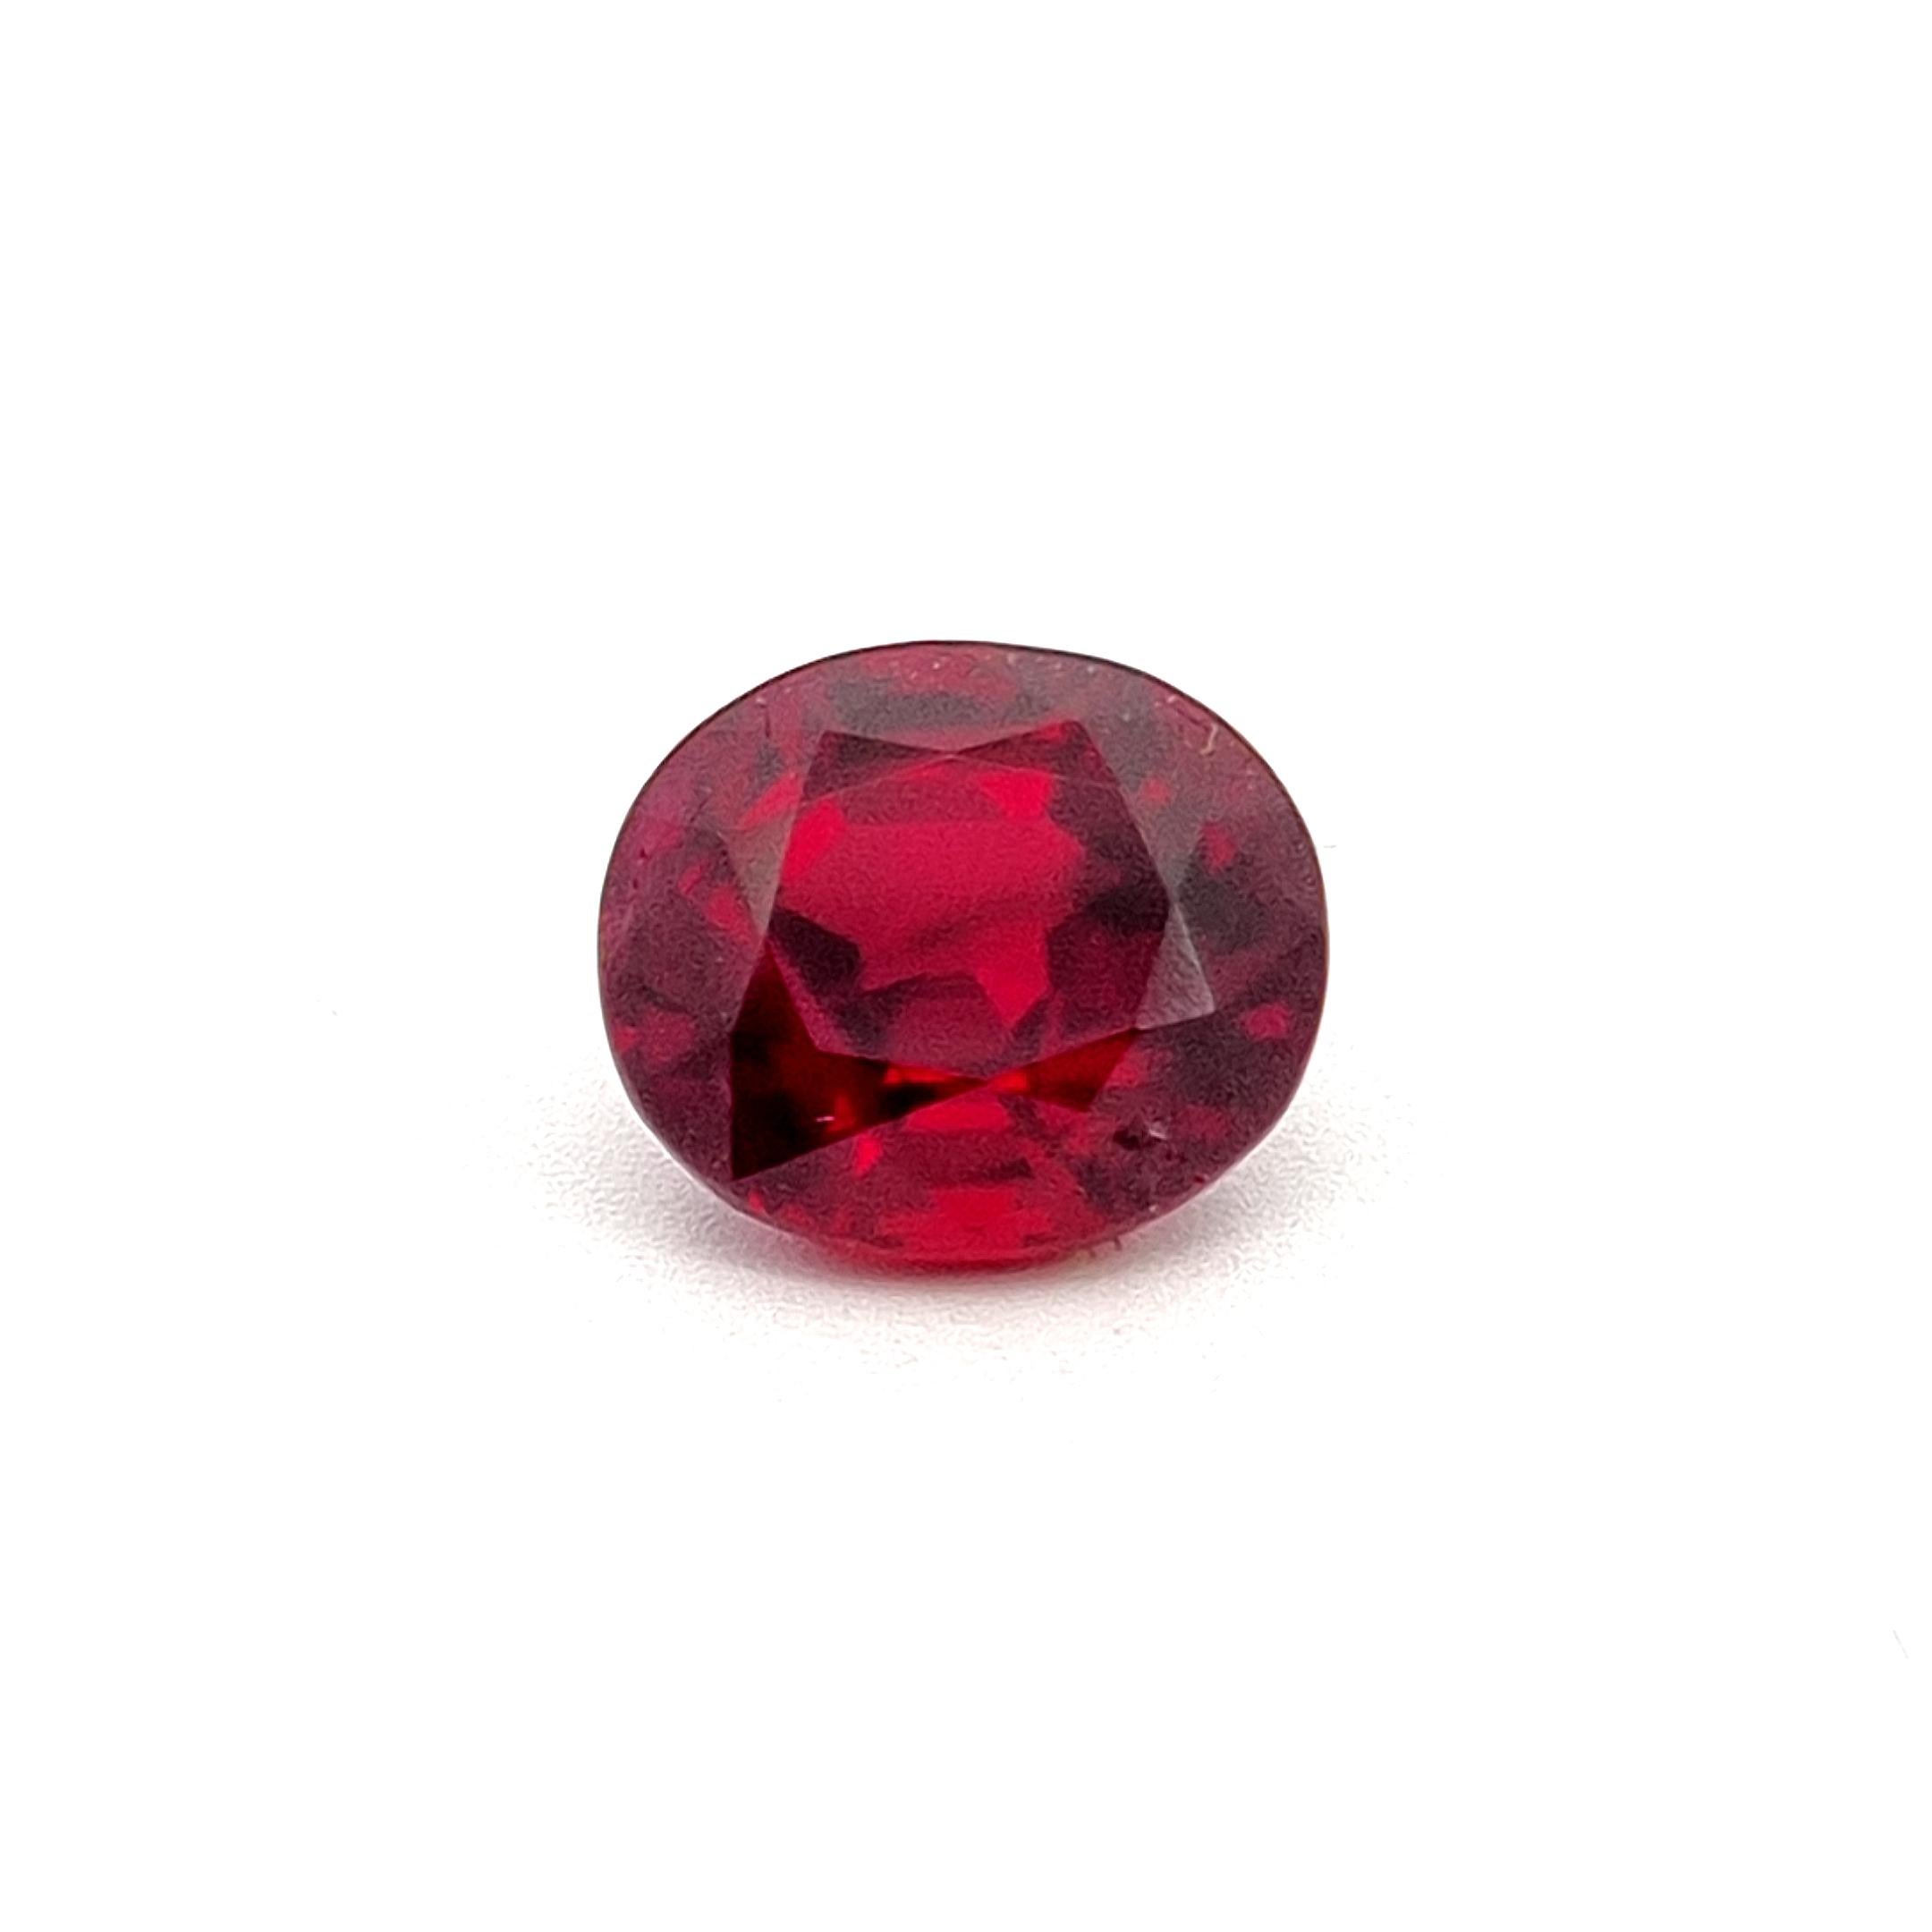 A Pigeons Blood Burmese Ruby and Diamond Ring.

Centering a 2.79 carat oval Unheated Burmese Ruby, certified by the GRS as 'Pigeons Blood' Red. 

An 18k White Gold ring, with a surround of approximately 1.30 carats of round and pearshape diamonds.